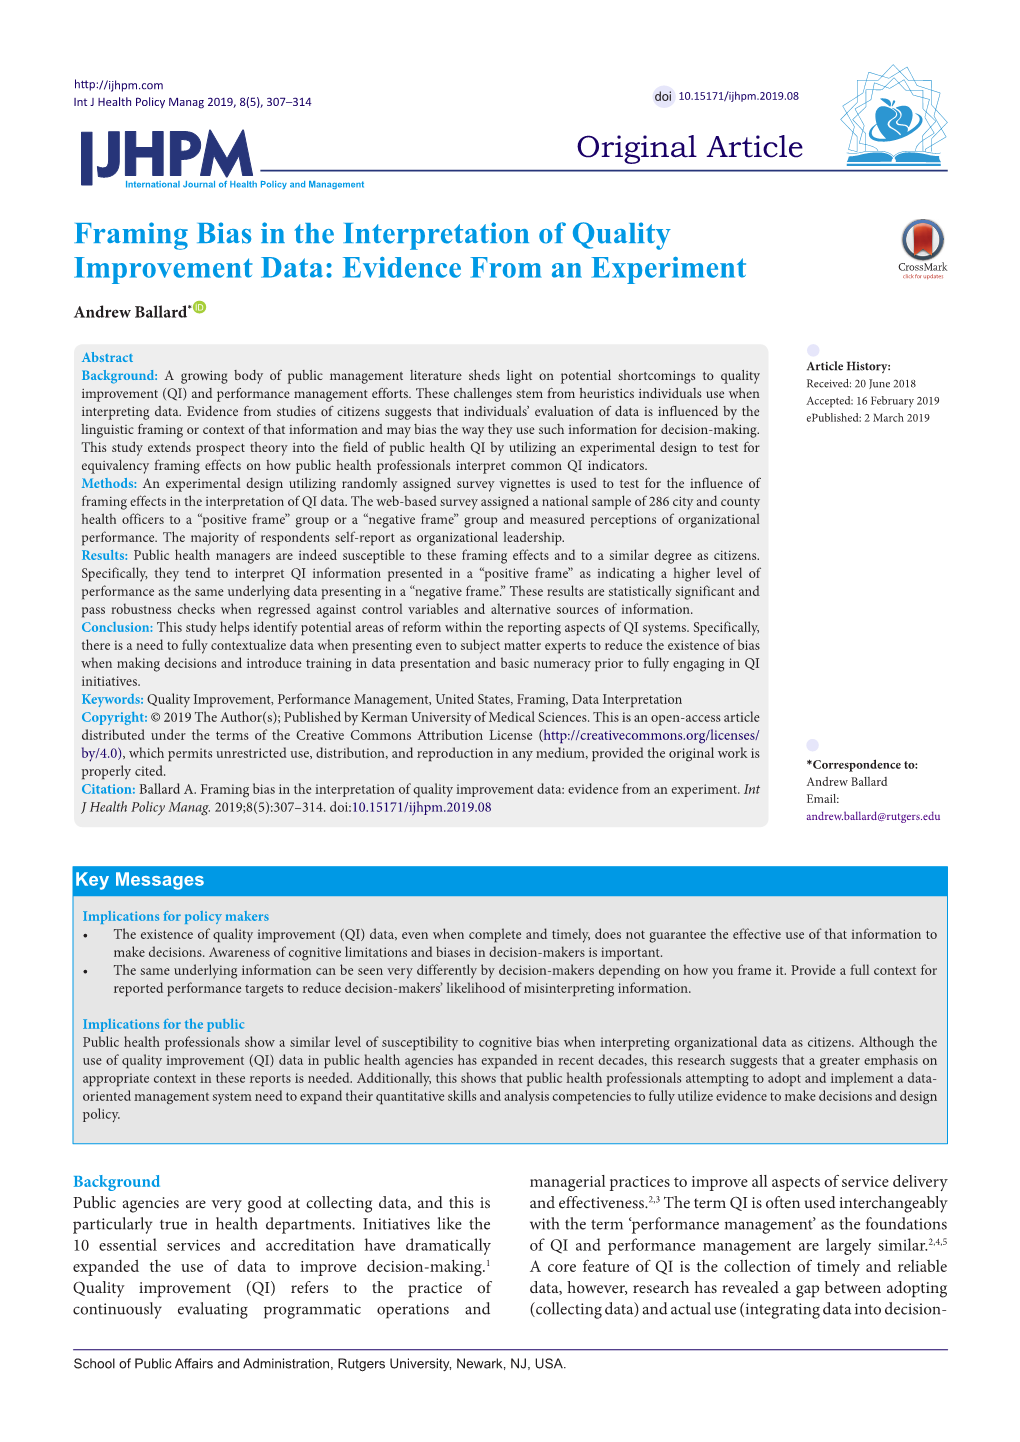 Framing Bias in the Interpretation of Quality Improvement Data: Evidence from an Experiment